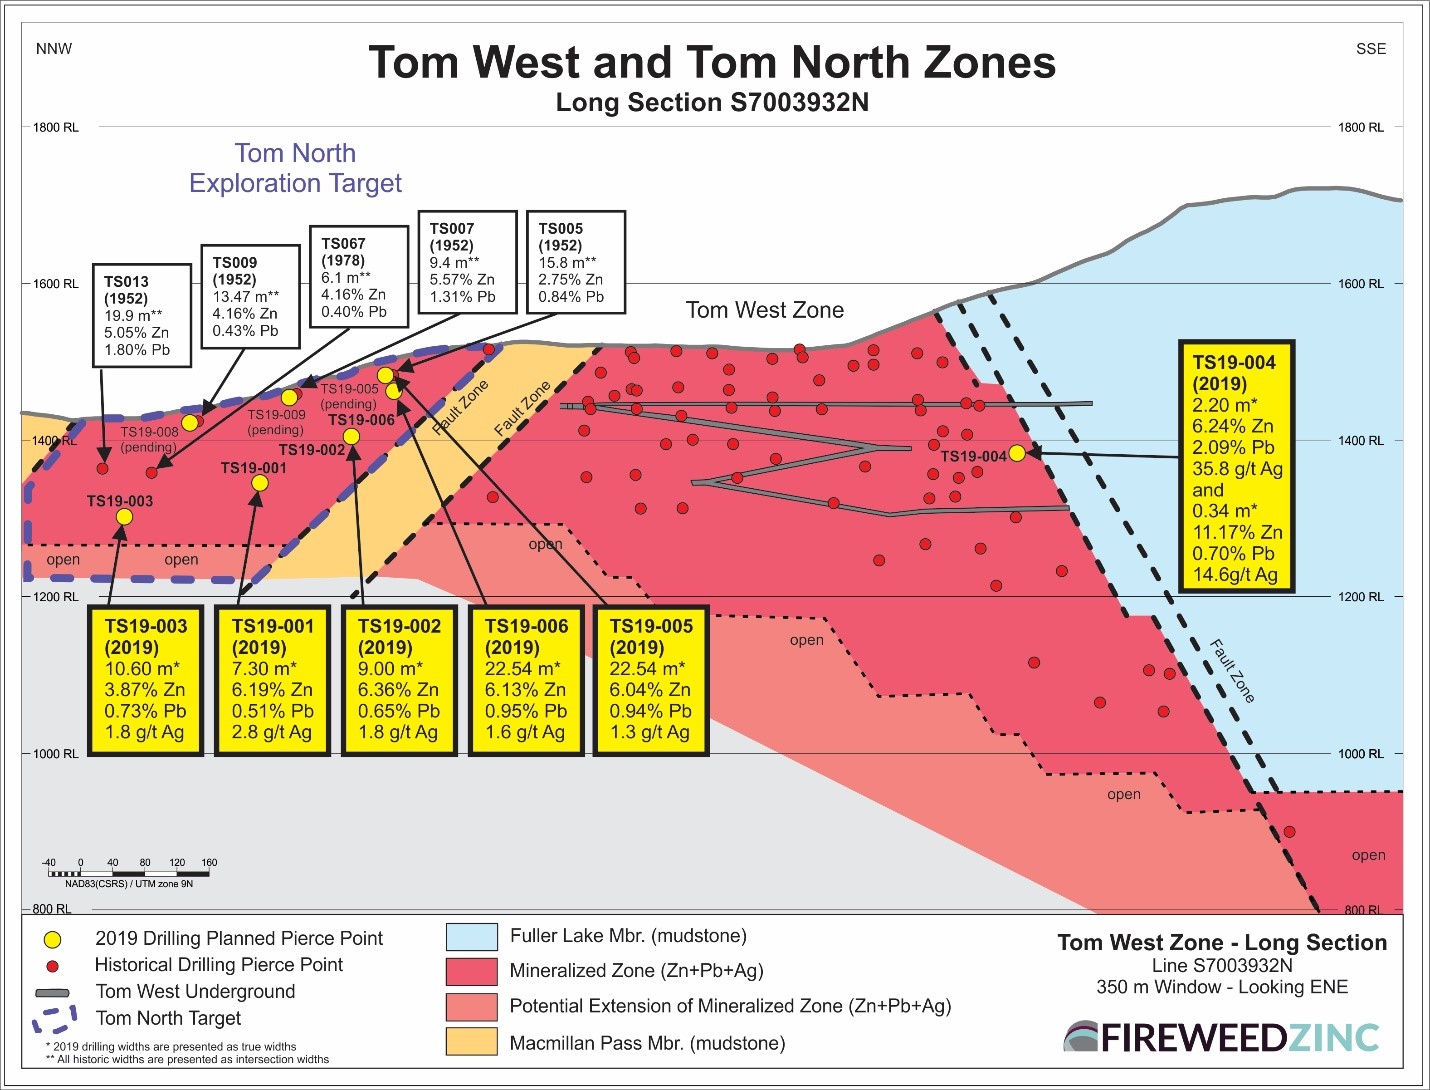 Tom West Zone - Long Section